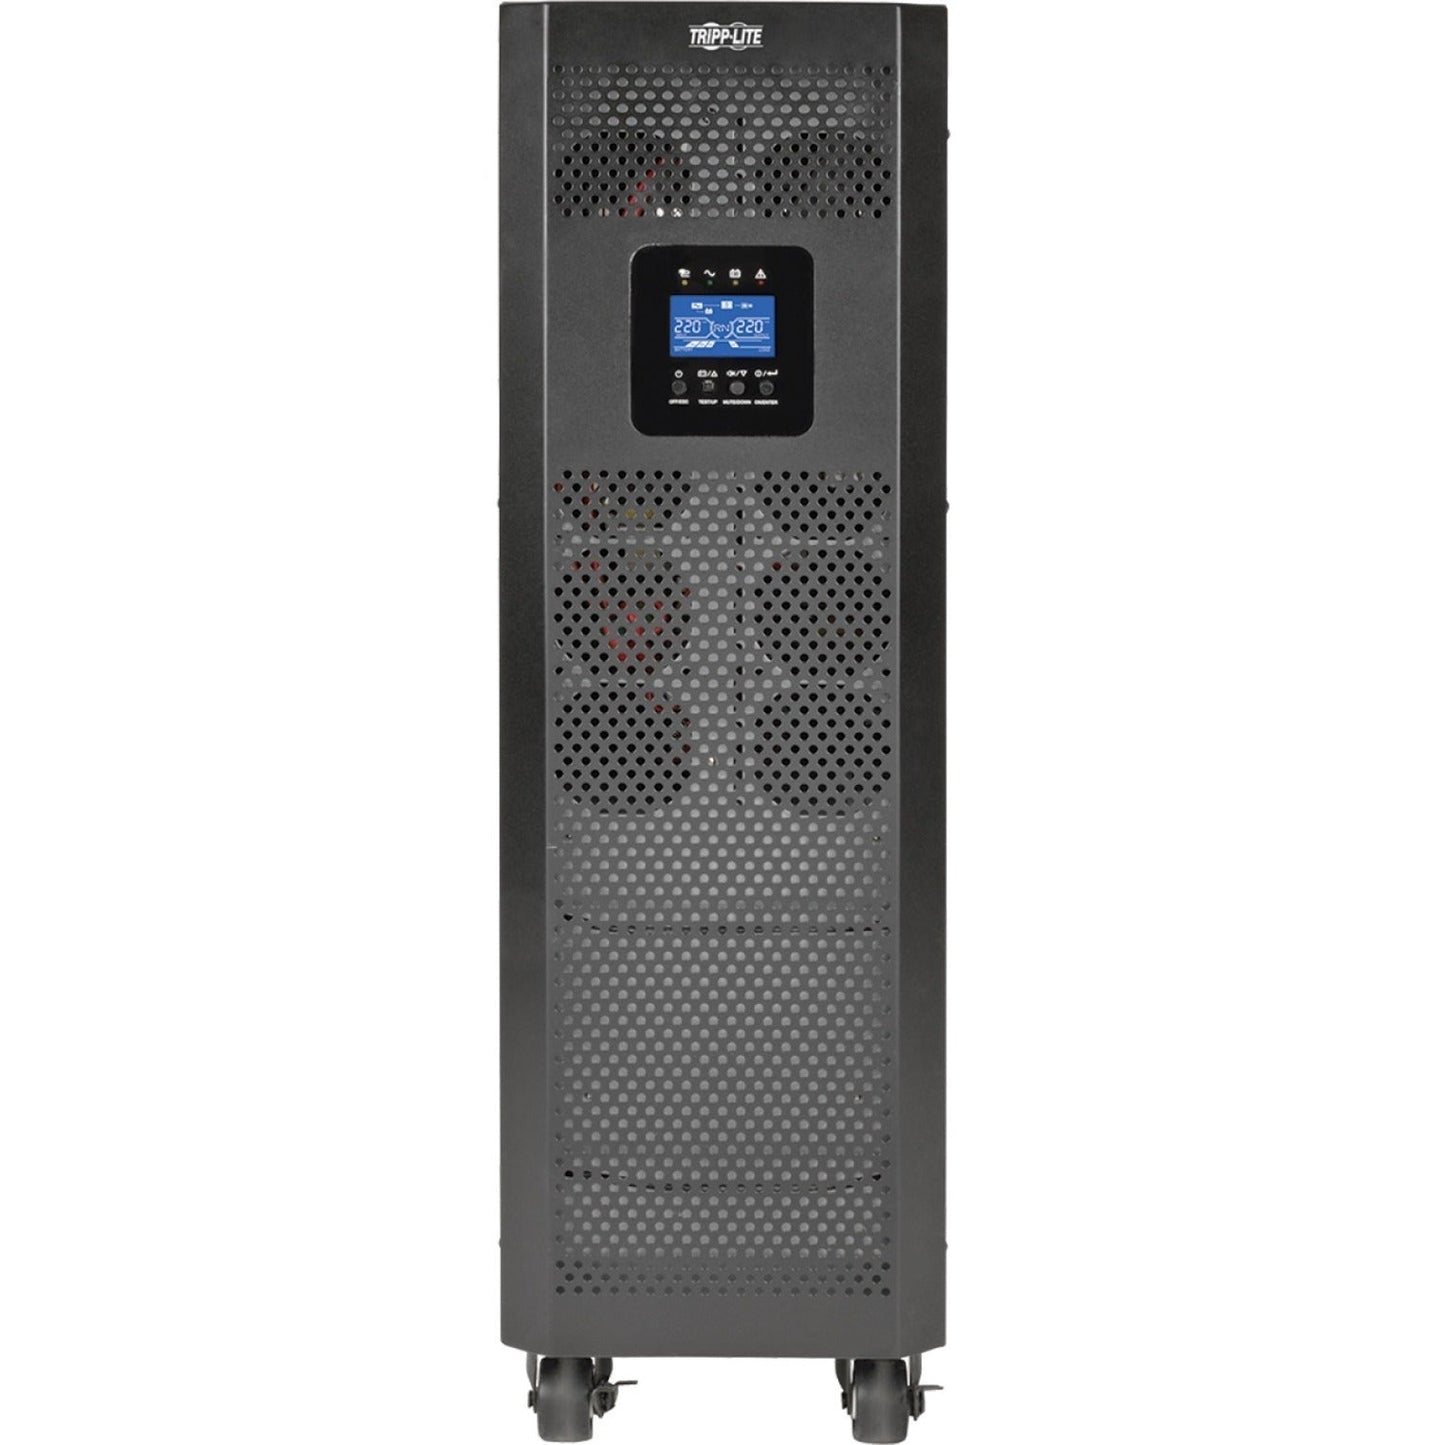 Tripp Lite SmartOnline SVTX Series 3-Phase 380/400/415V 20kVA 18kW On-Line Double-Conversion UPS Tower Extended Run SNMP Option